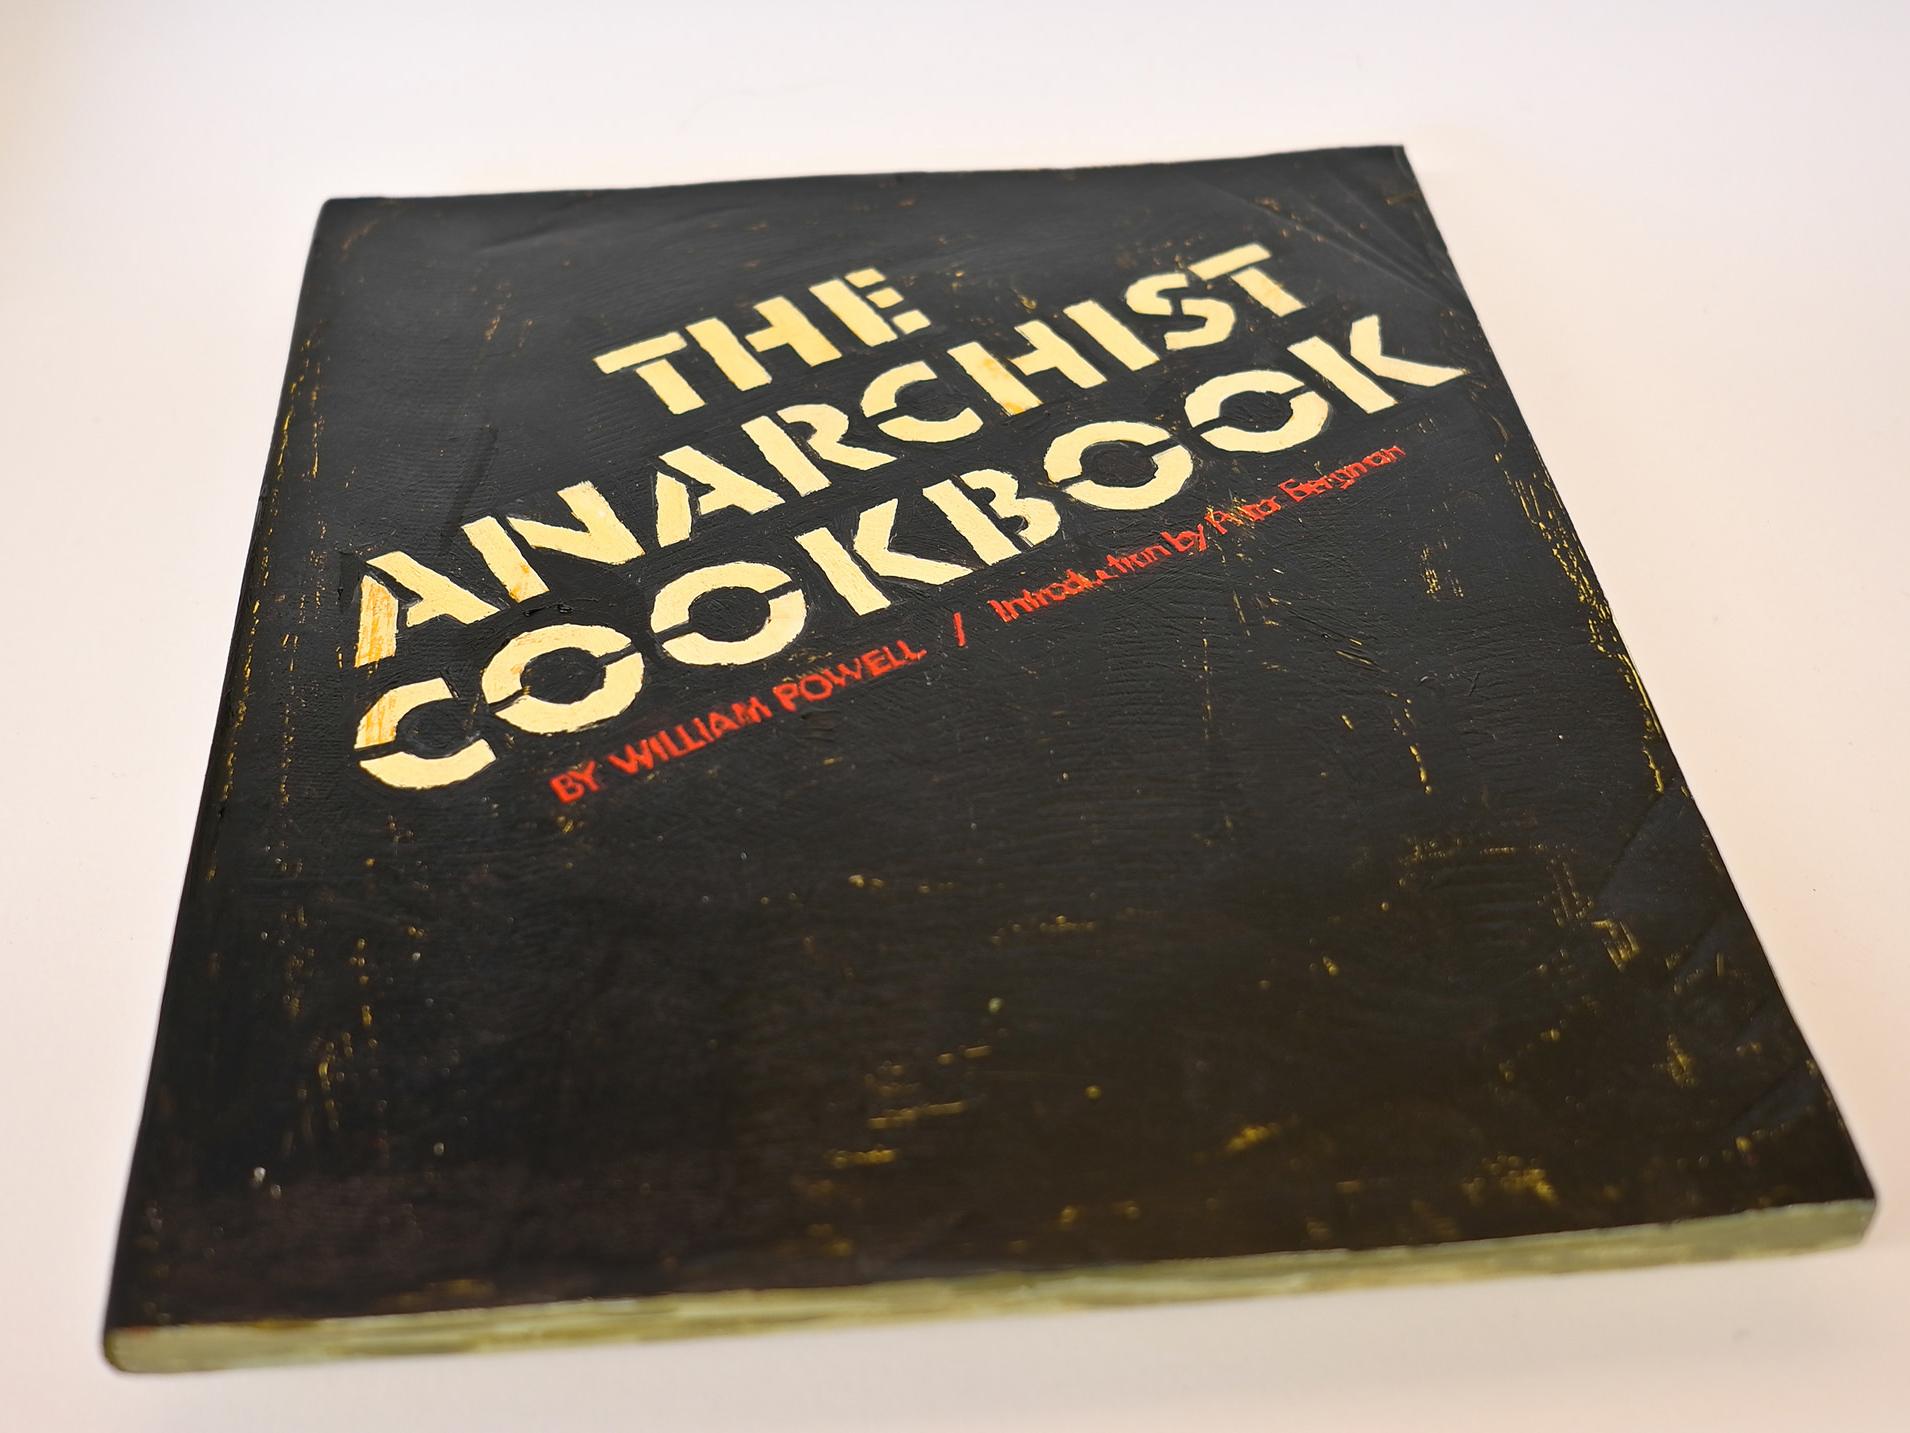 The Anarchist Cookbook is available via mainstream online retailers